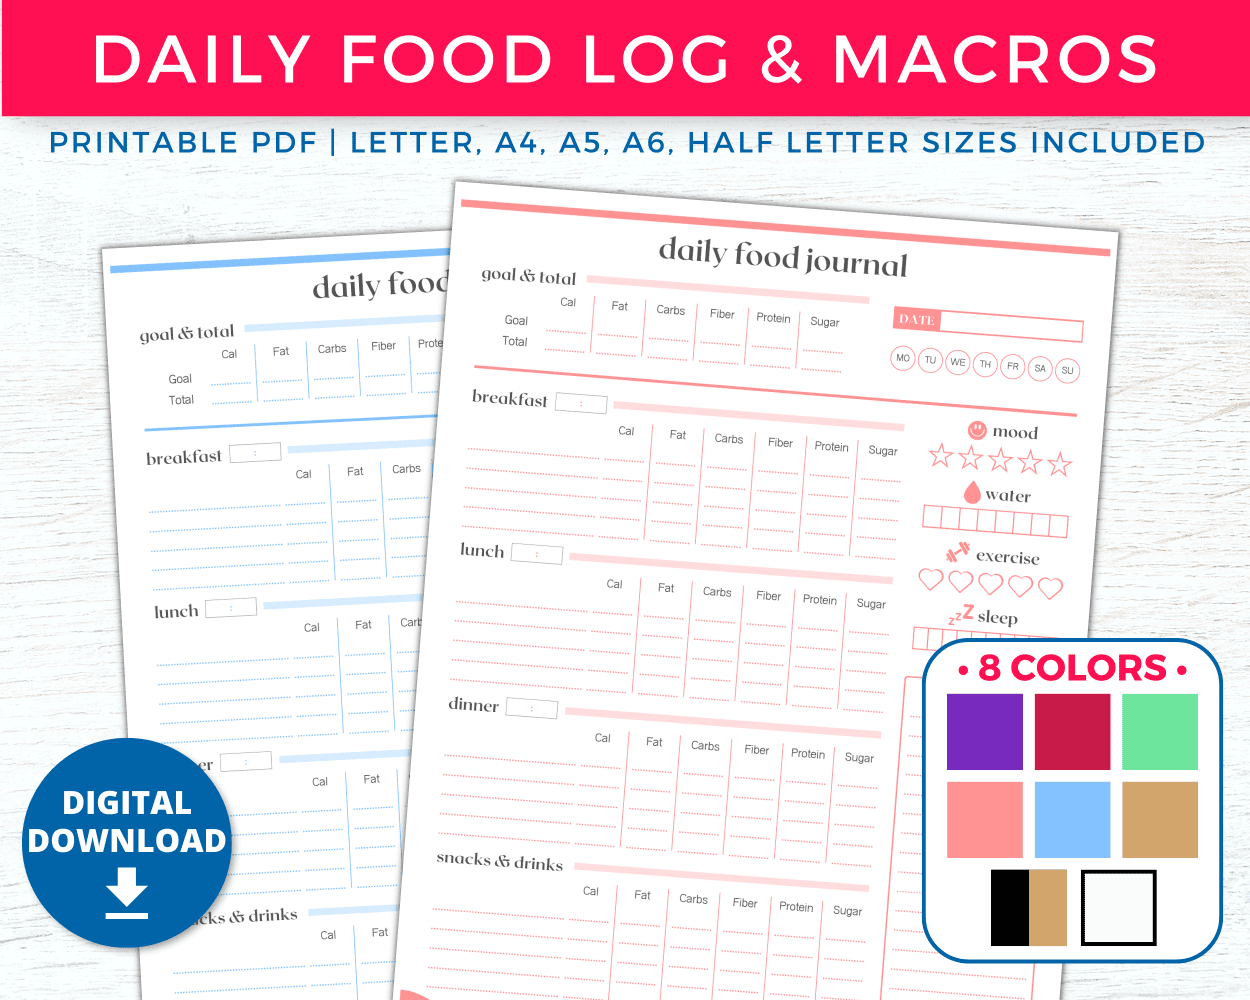 Free Printable Calorie Counter & Fitness Tracker